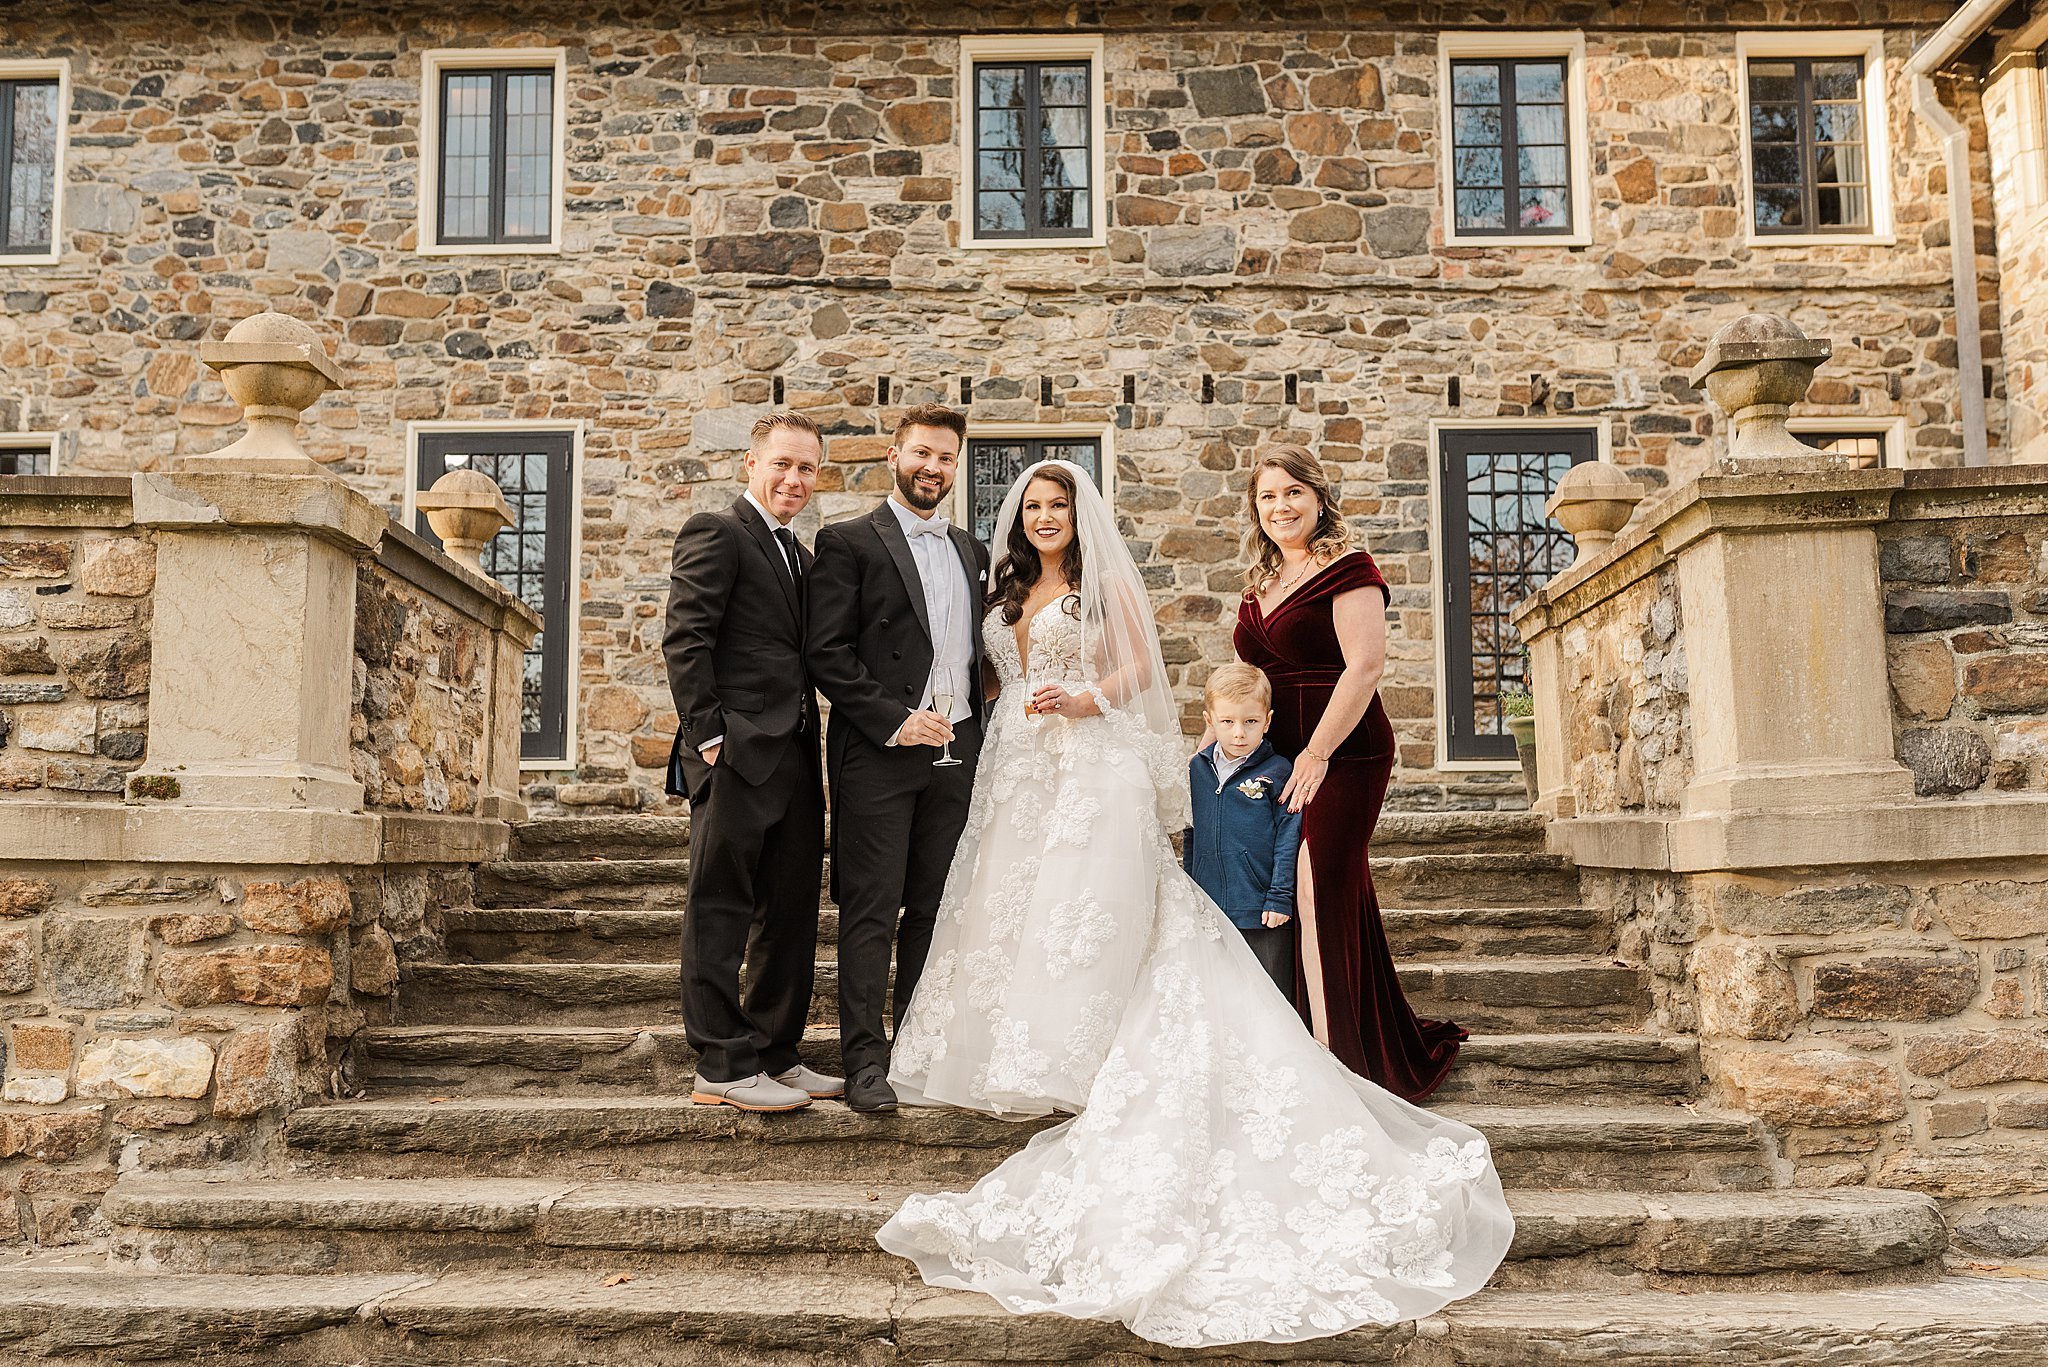 Hunting Hill Mansion Parque Ridley Creek Park Newtown Sauare PA Luxury Autumn Wedding Photography_3975.jpg